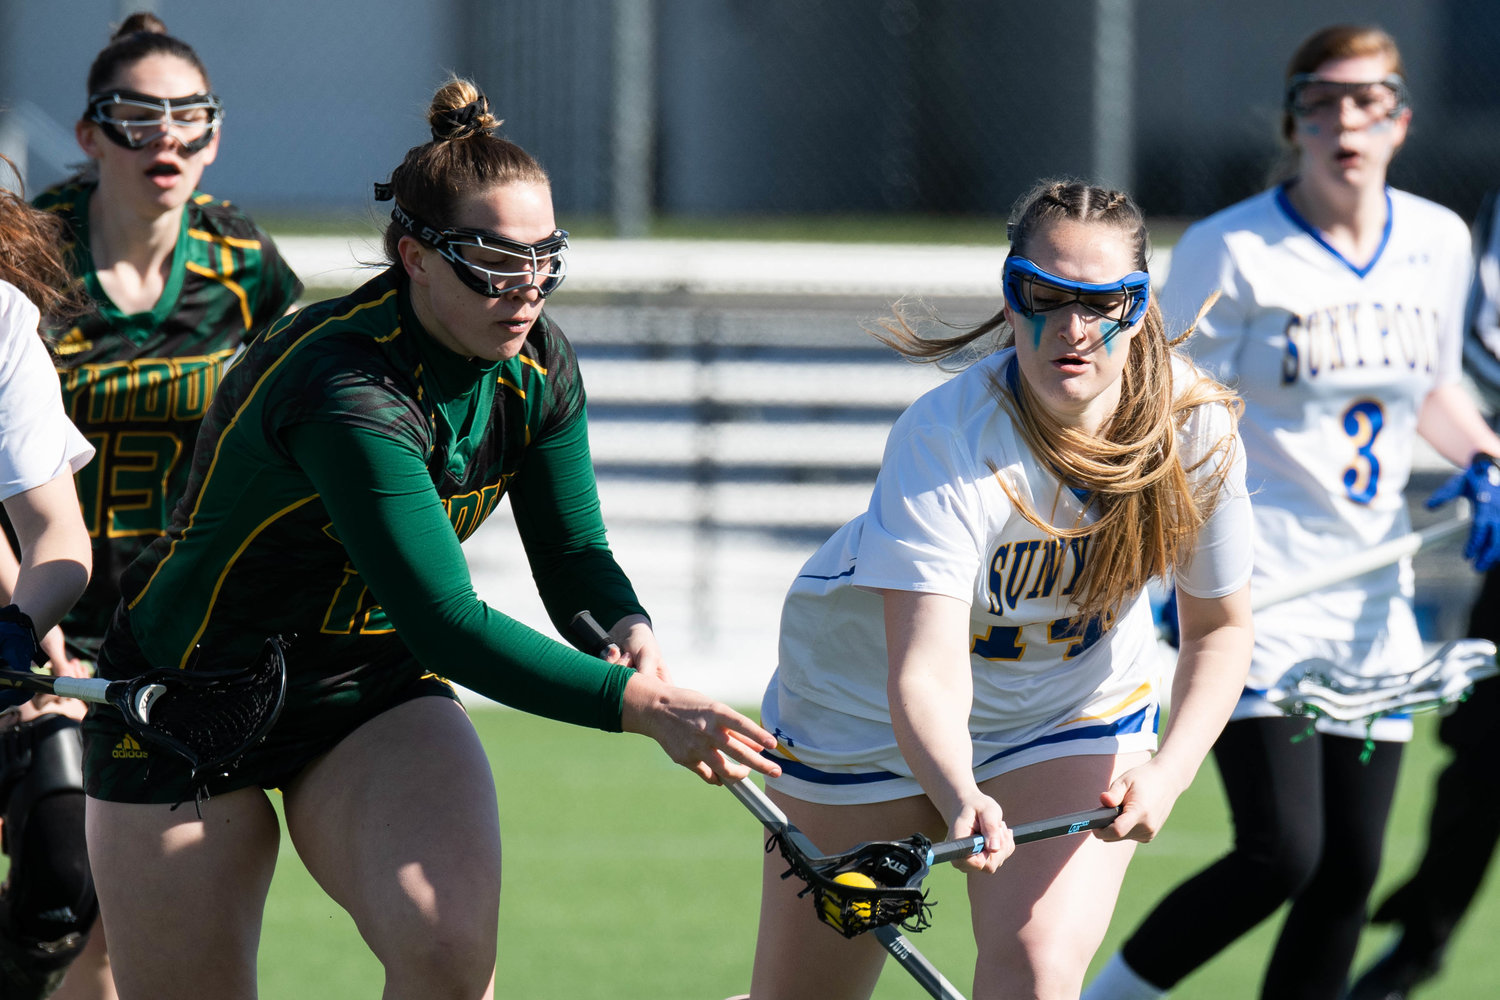 FIGHTING FOR CONTROL — SUNY Polytechnic Institute player Emma Draper, right, fights for control of the ball during the game against Northern-Vermont Lyndon on Wednesday. The Wildcats won 18-4.